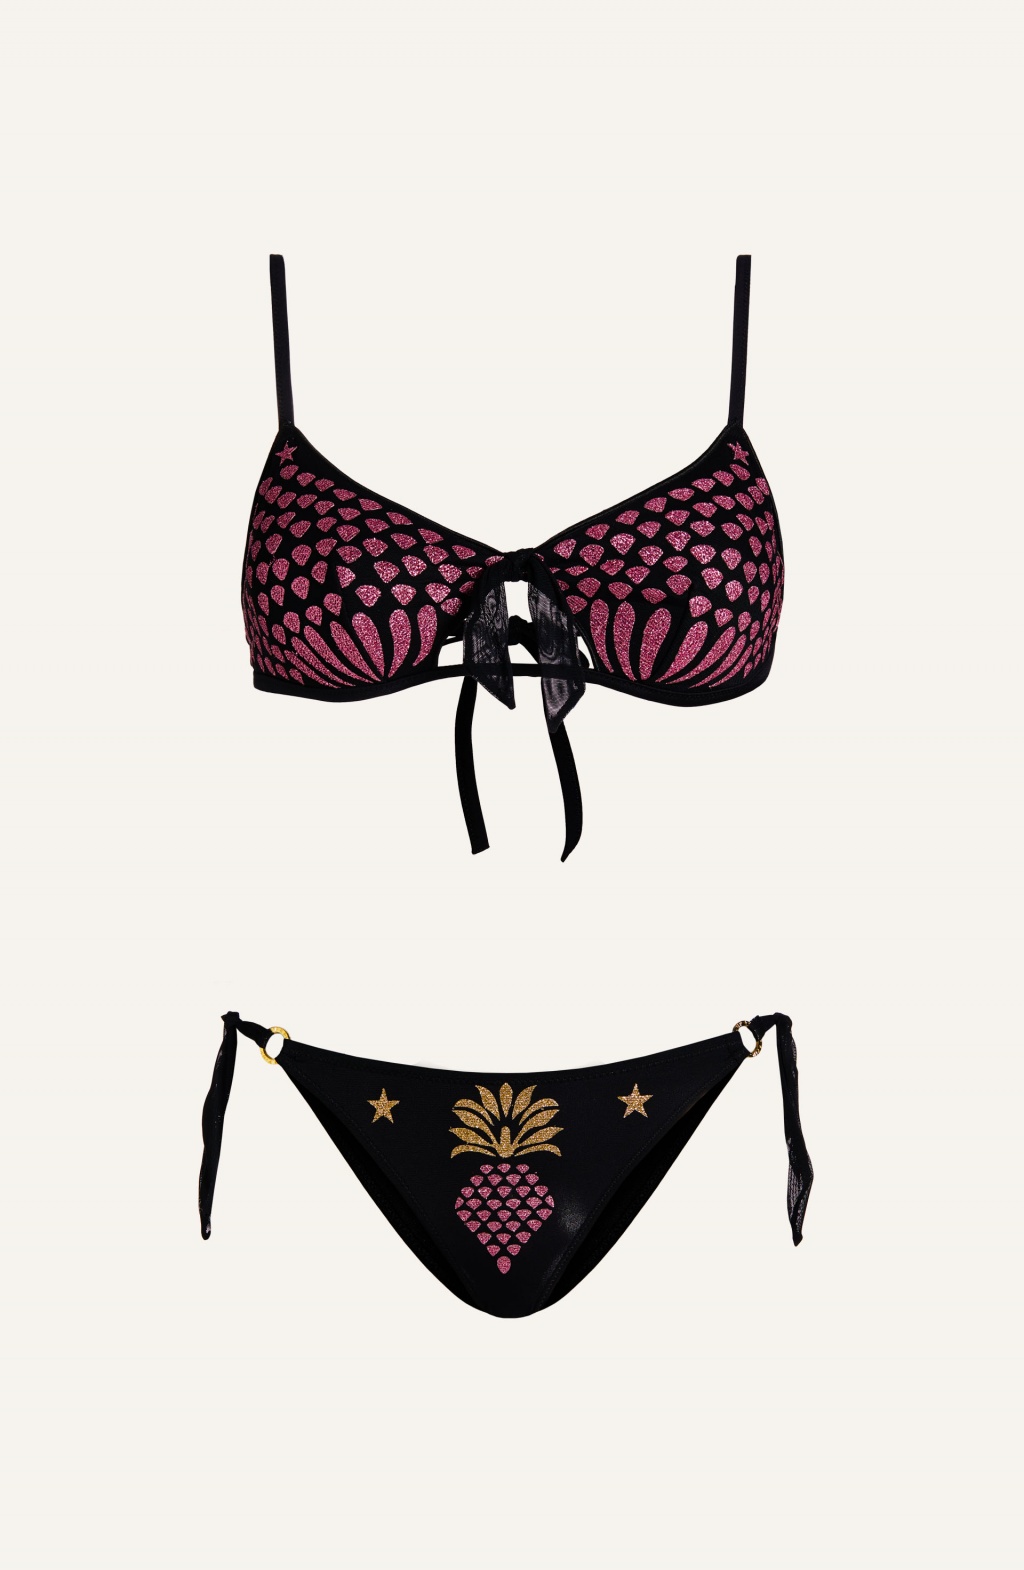 Bikini brassiere briefs Bow ties Embroidery Sequins Dune